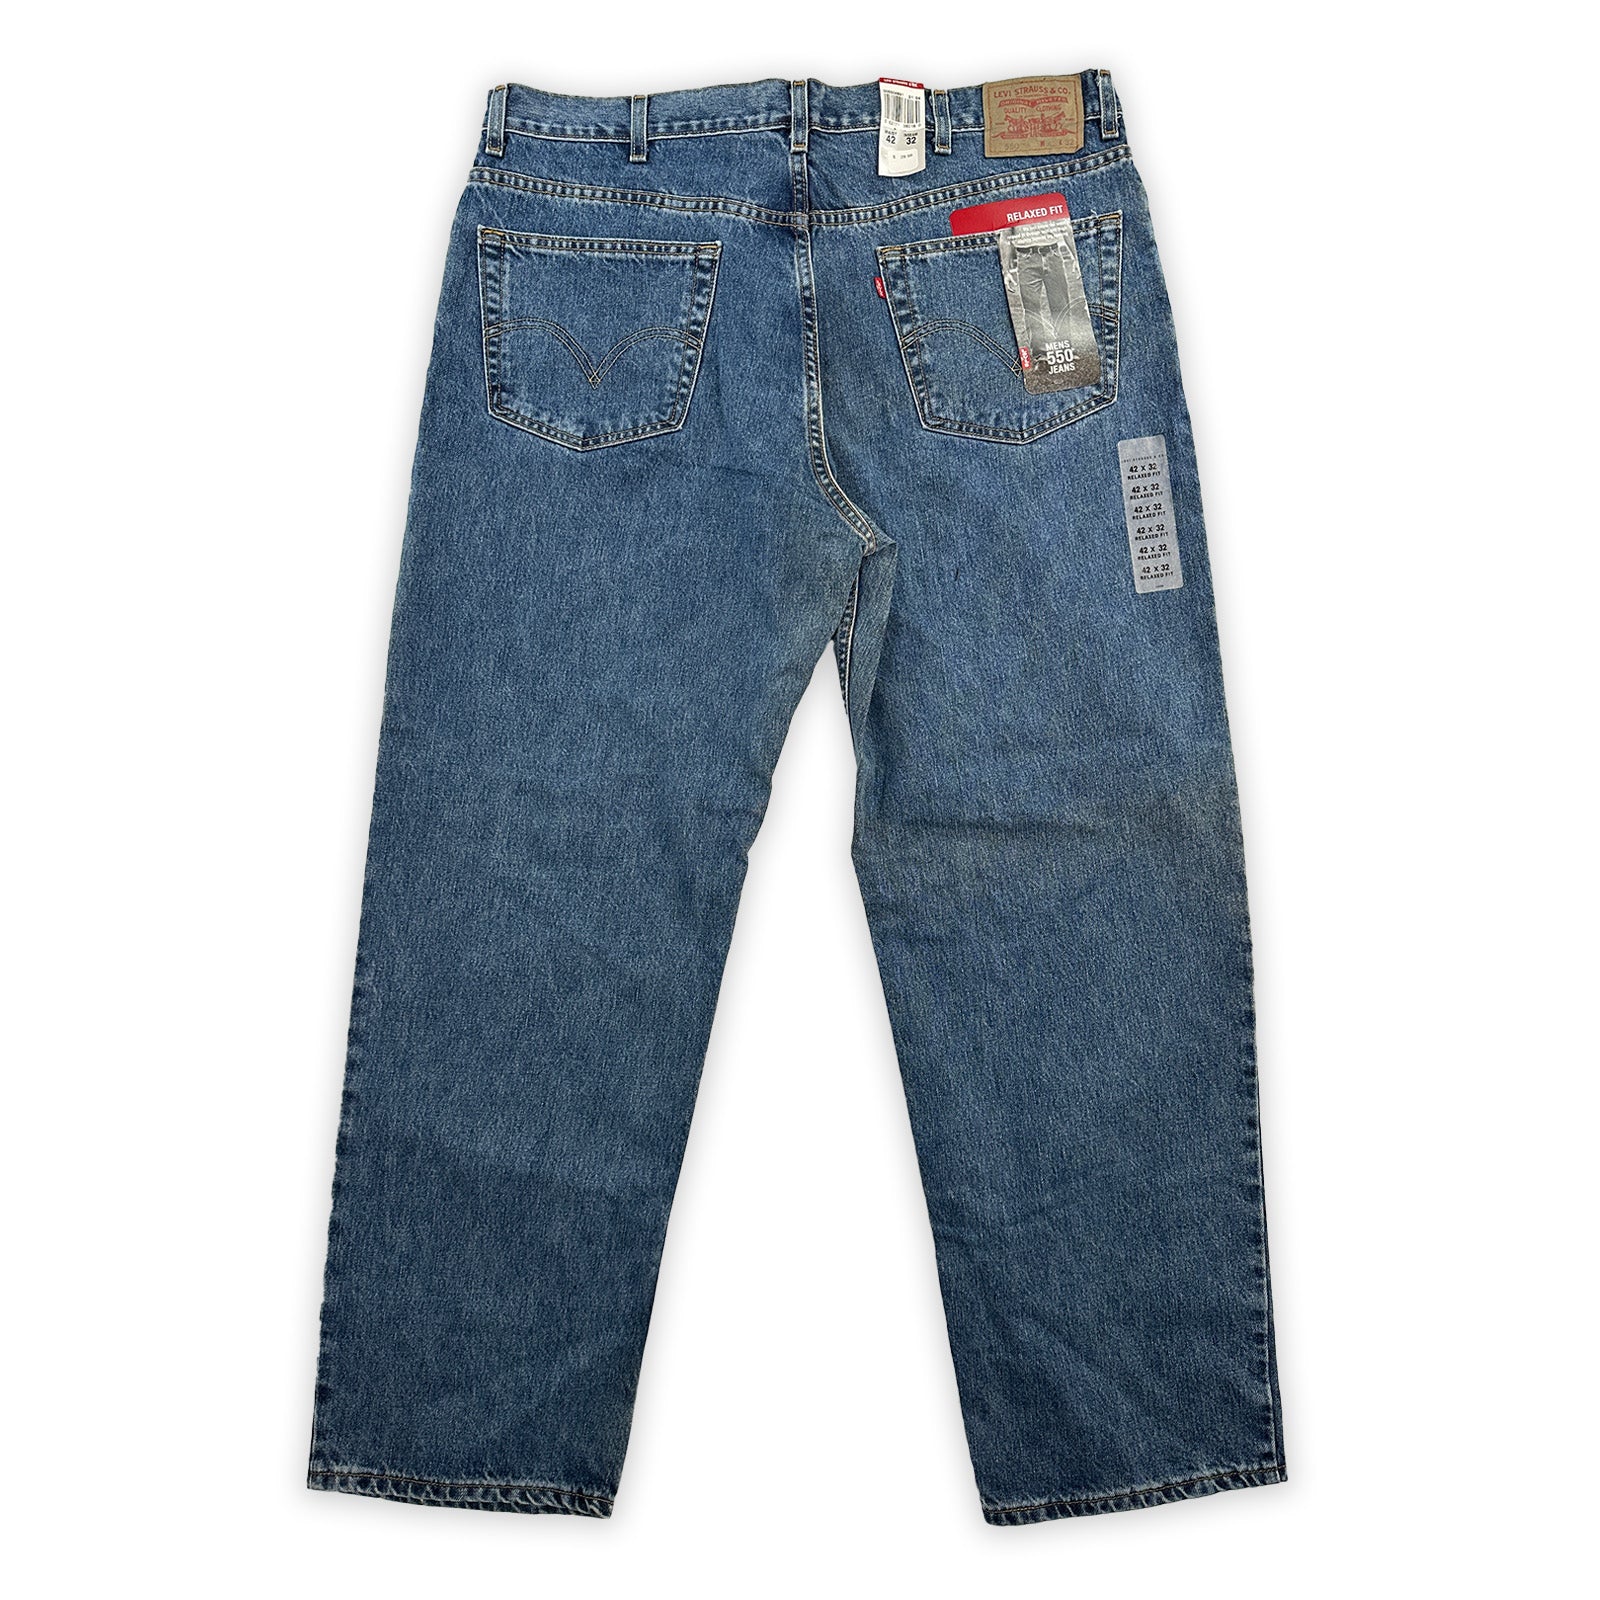 Vintage Levi's 505 Straight Leg - New with Tags - 42x32 Great Lakes Reclaimed Denim